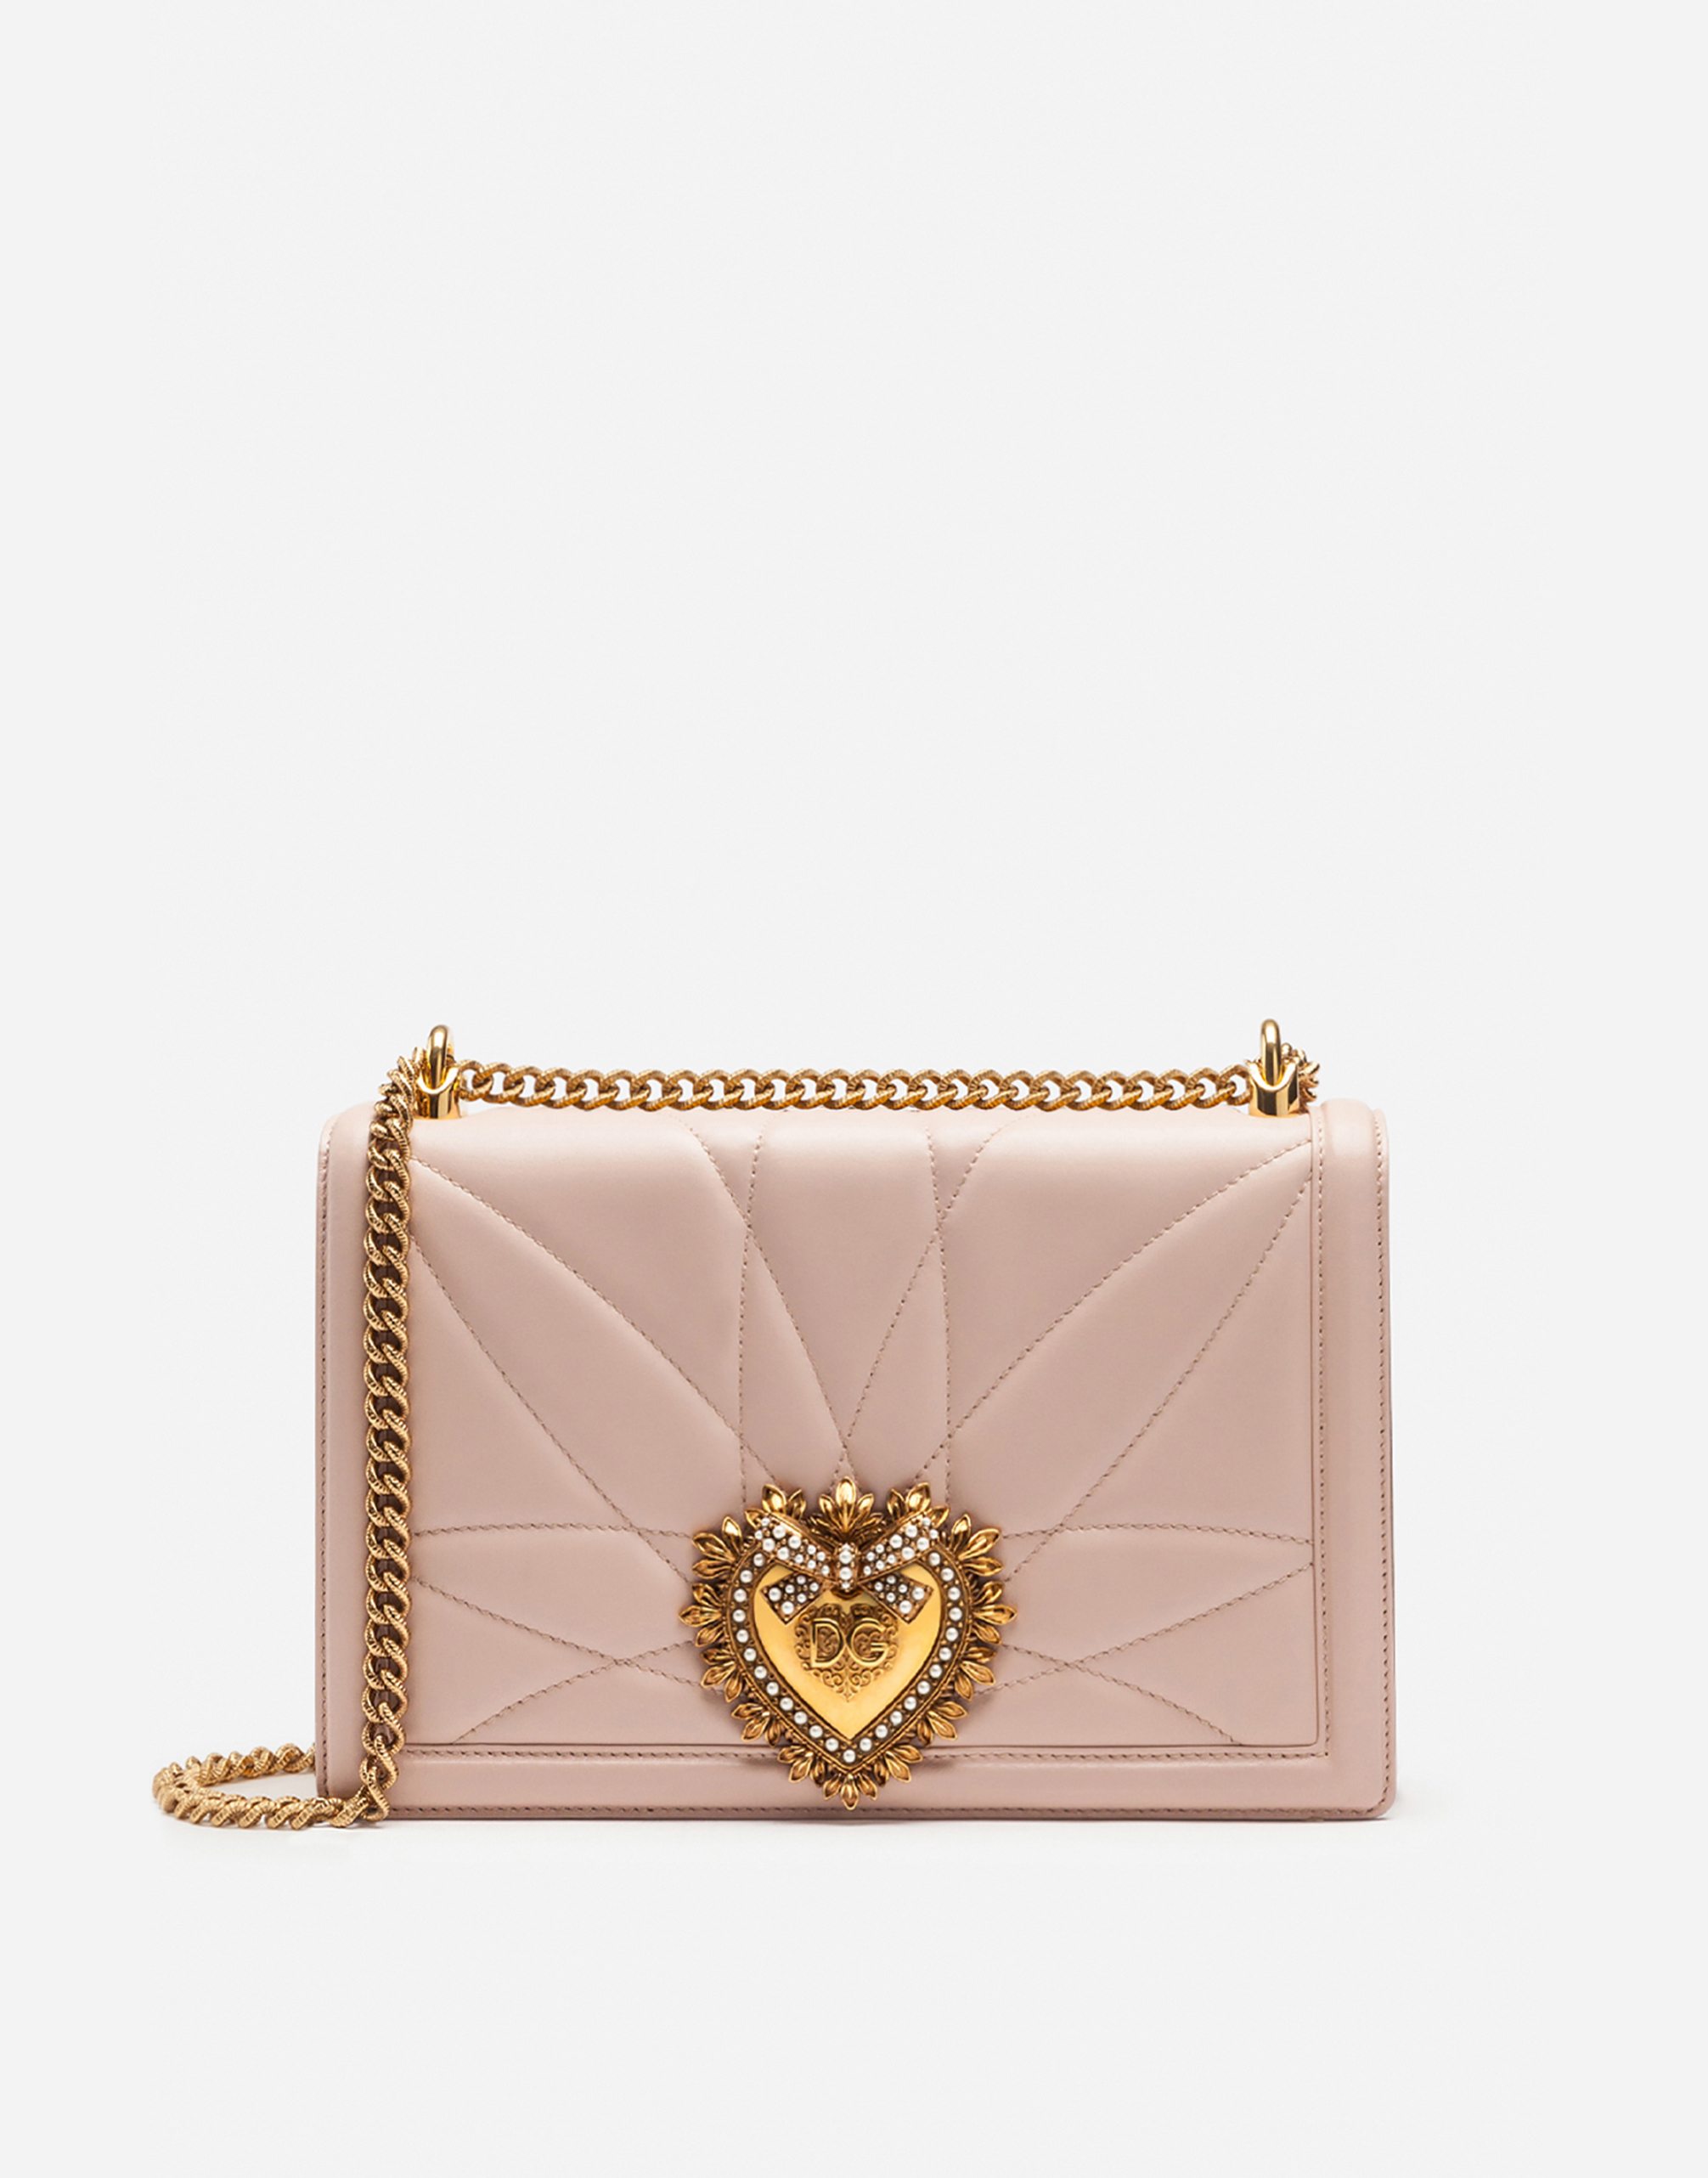 Dolce & Gabbana Large Devotion Bag In Quilted Nappa Leather In Pale Pink